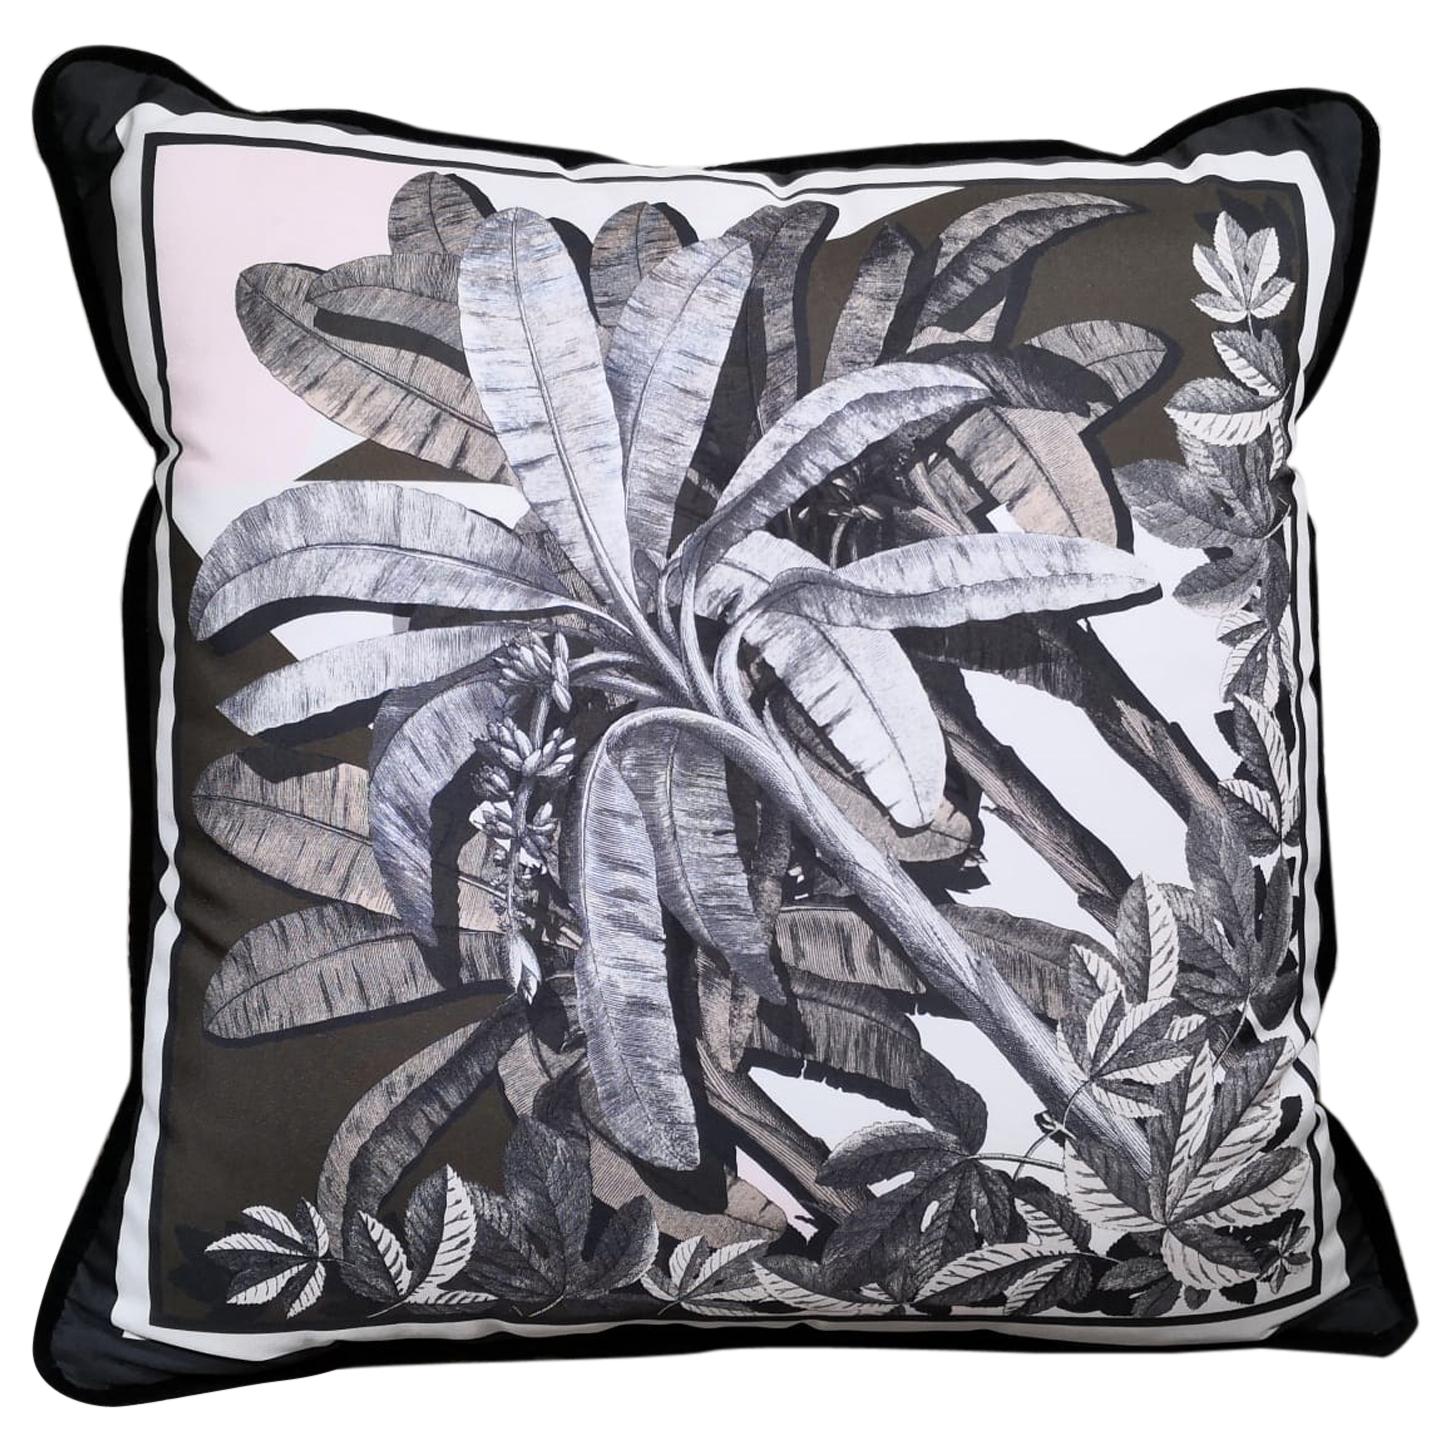 Italian Handmade Contemporary Style, "Black and Wild" Collection Pillow 1 of 4 For Sale